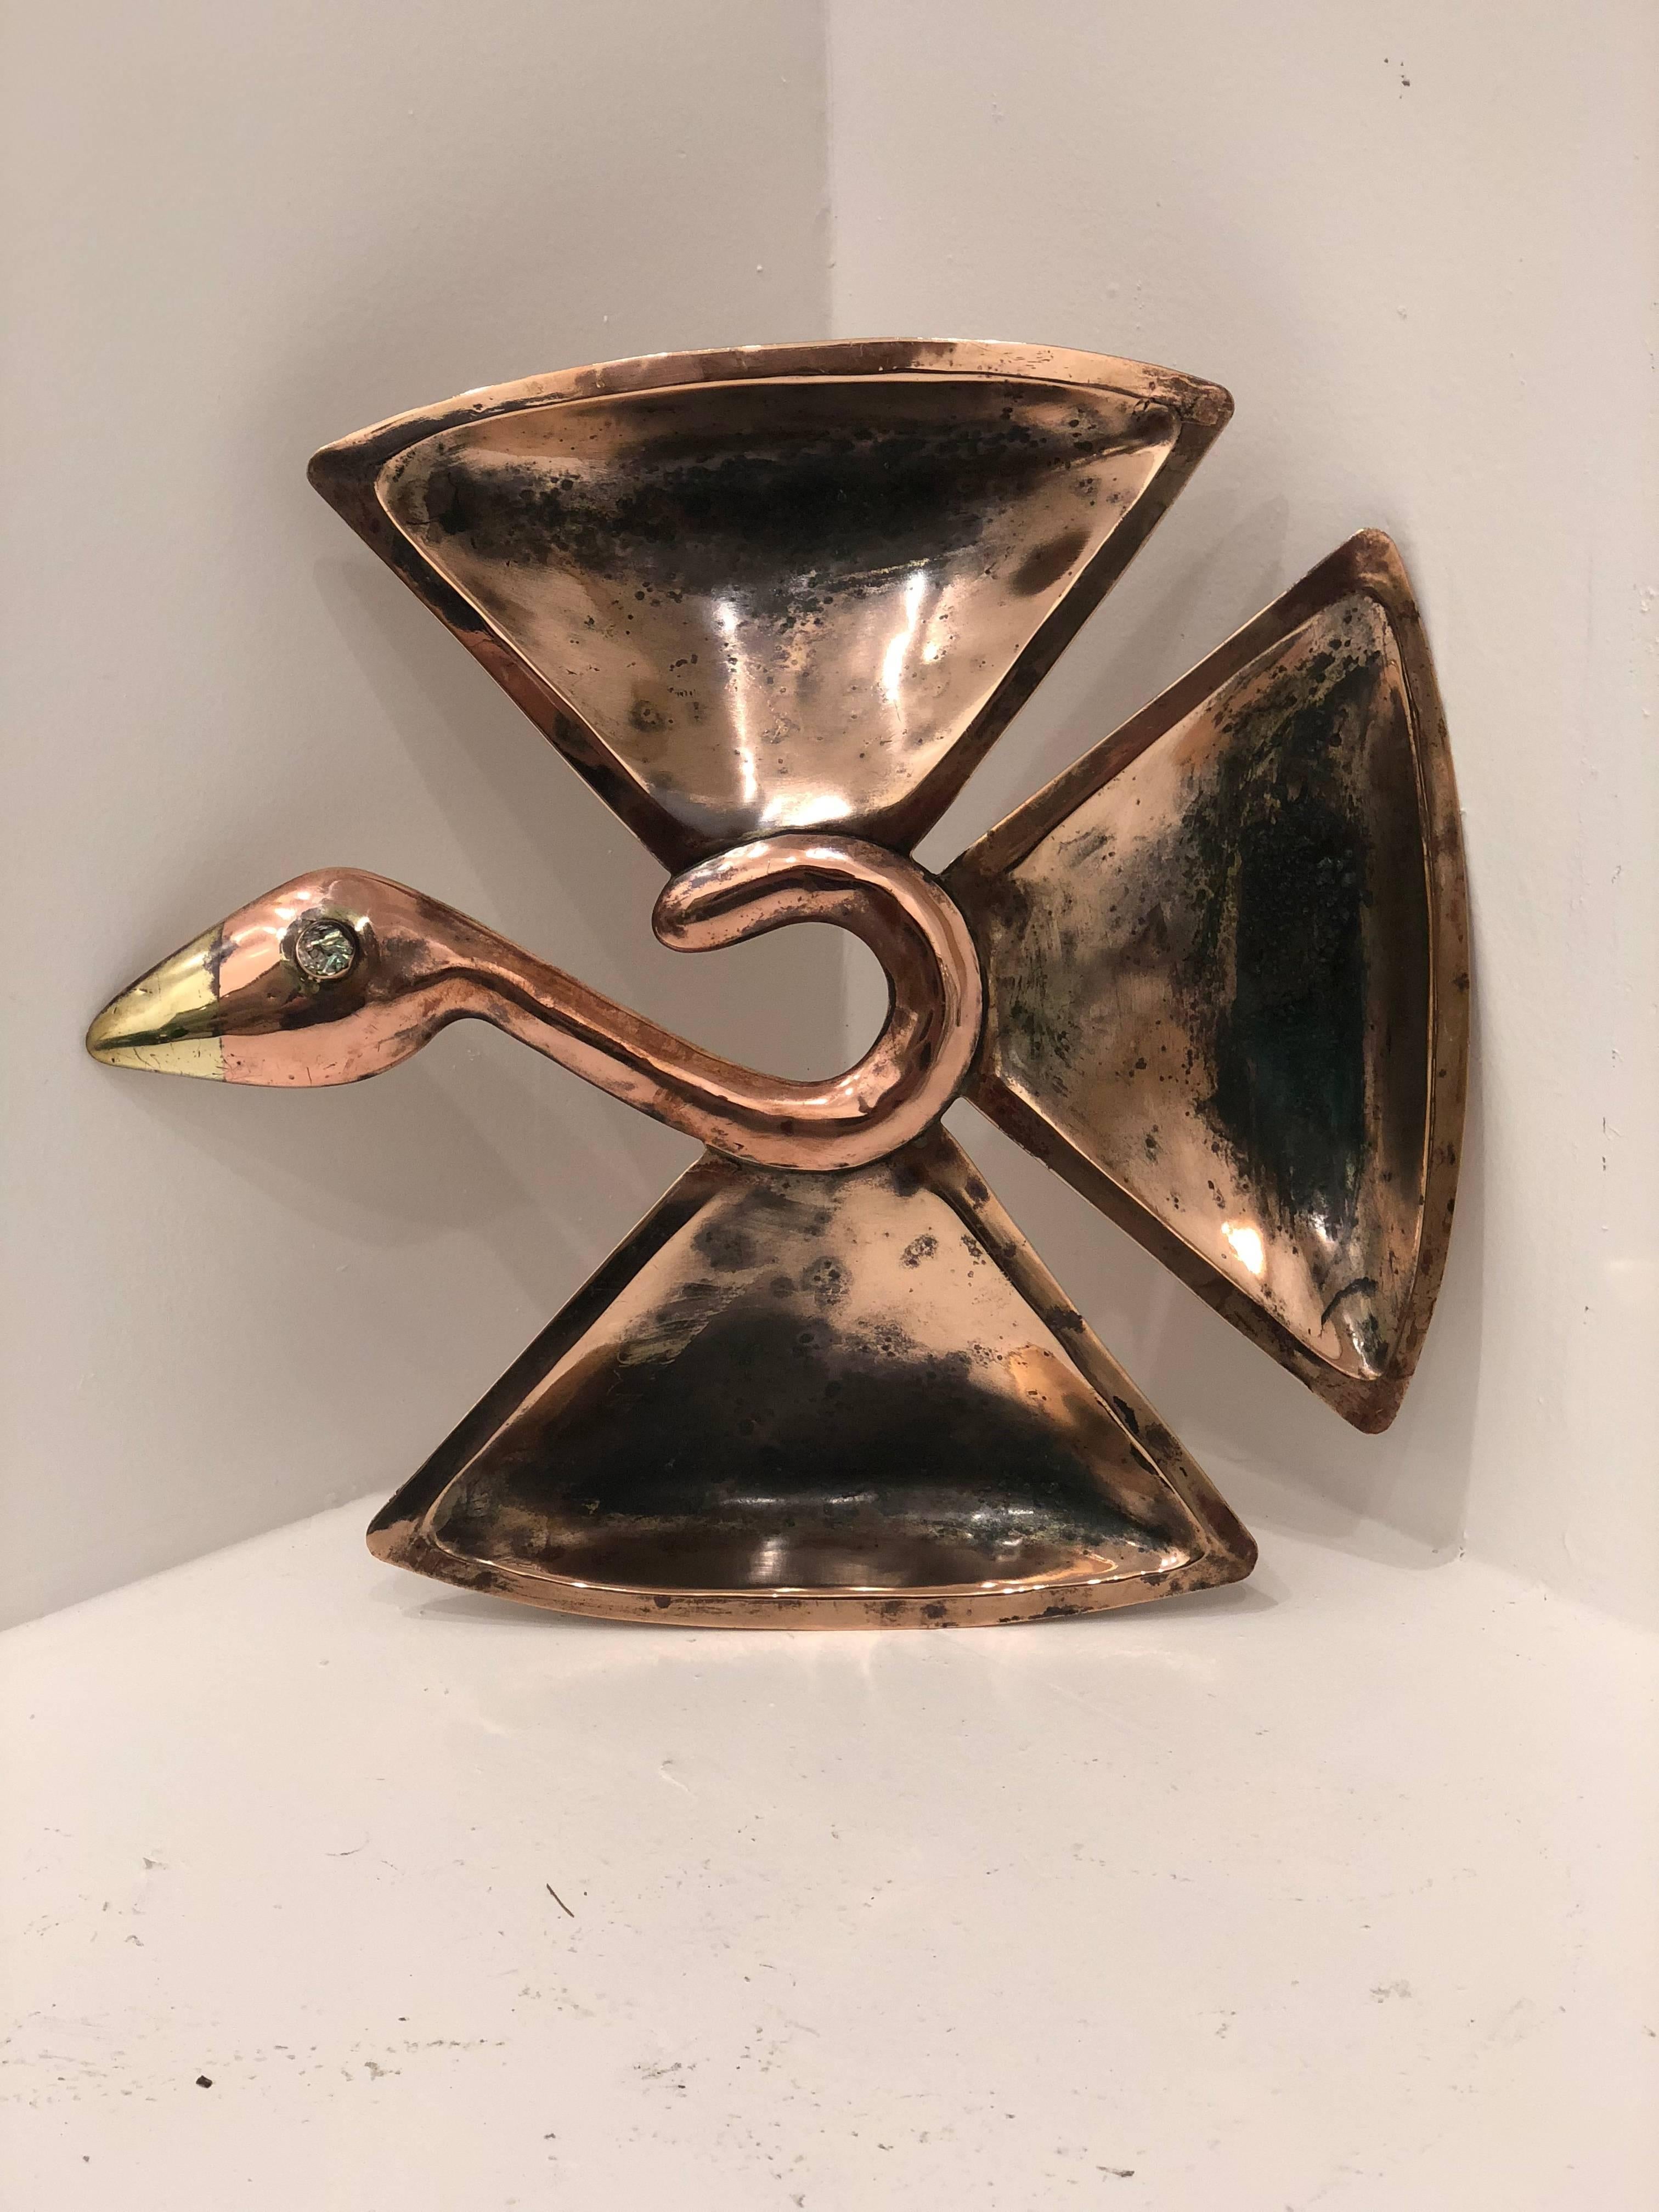 Beautiful and rare midcentury serving tray in copper and brass with abalone shell eye, the tray its signed we polished the piece but left some patina to add character.